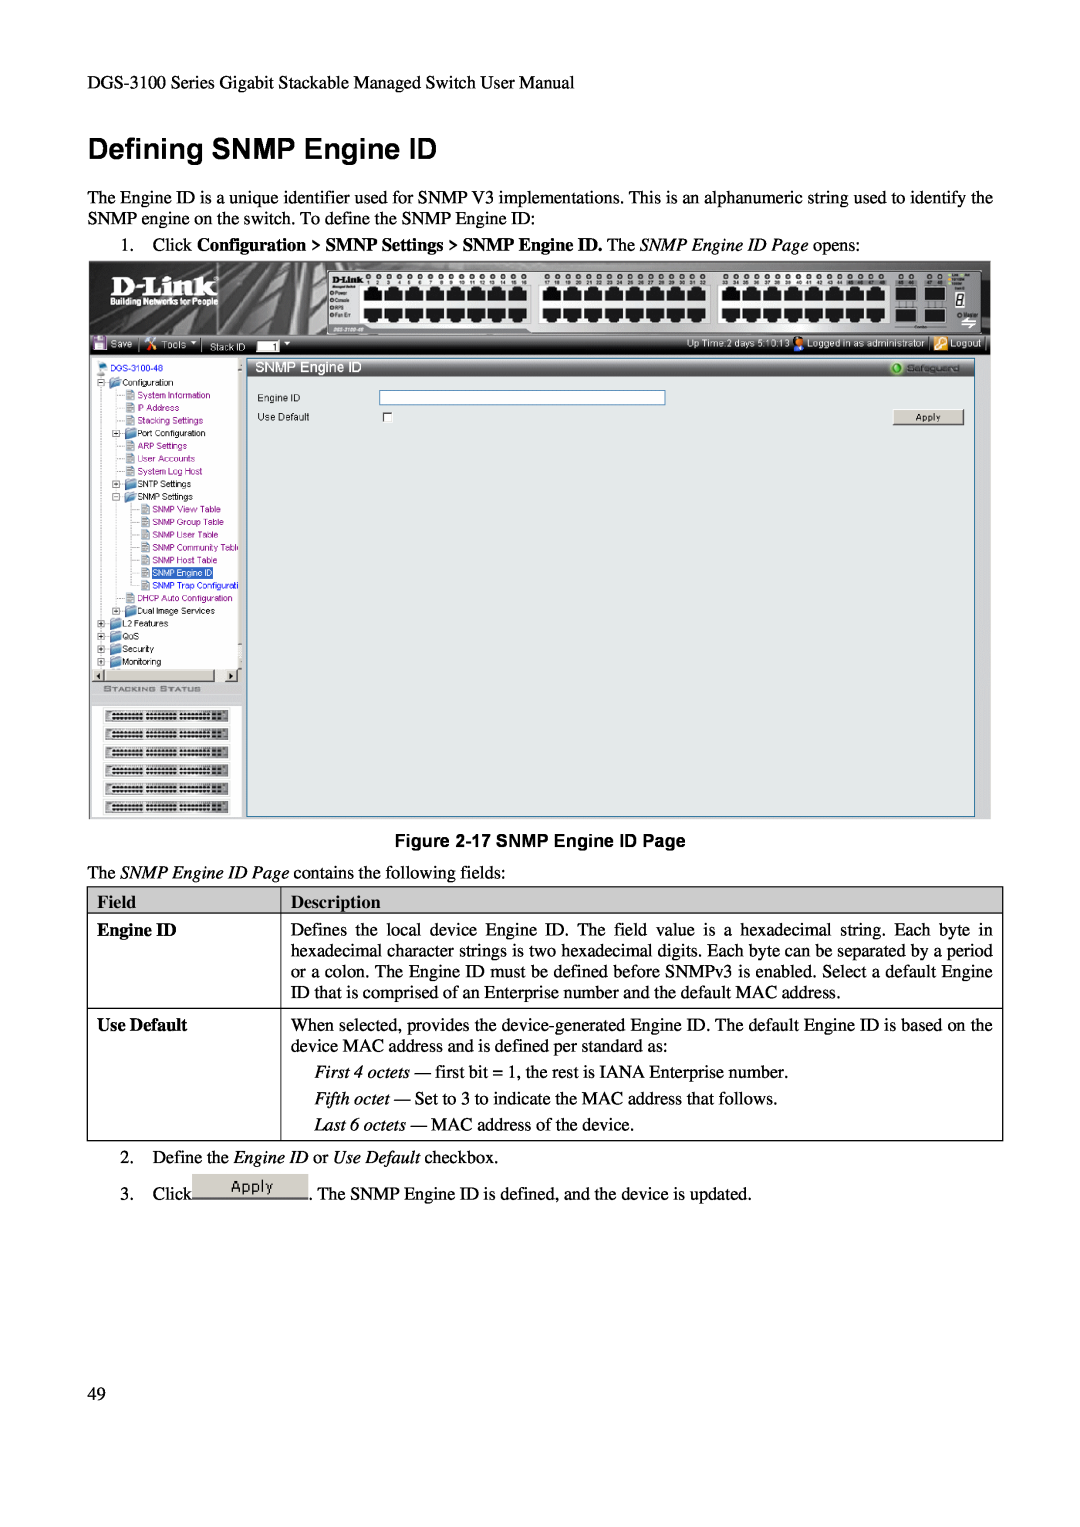 D-Link DGS-3100 user manual Defining SNMP Engine ID, 17 SNMP Engine ID Page, Field Engine ID Use Default, Description 